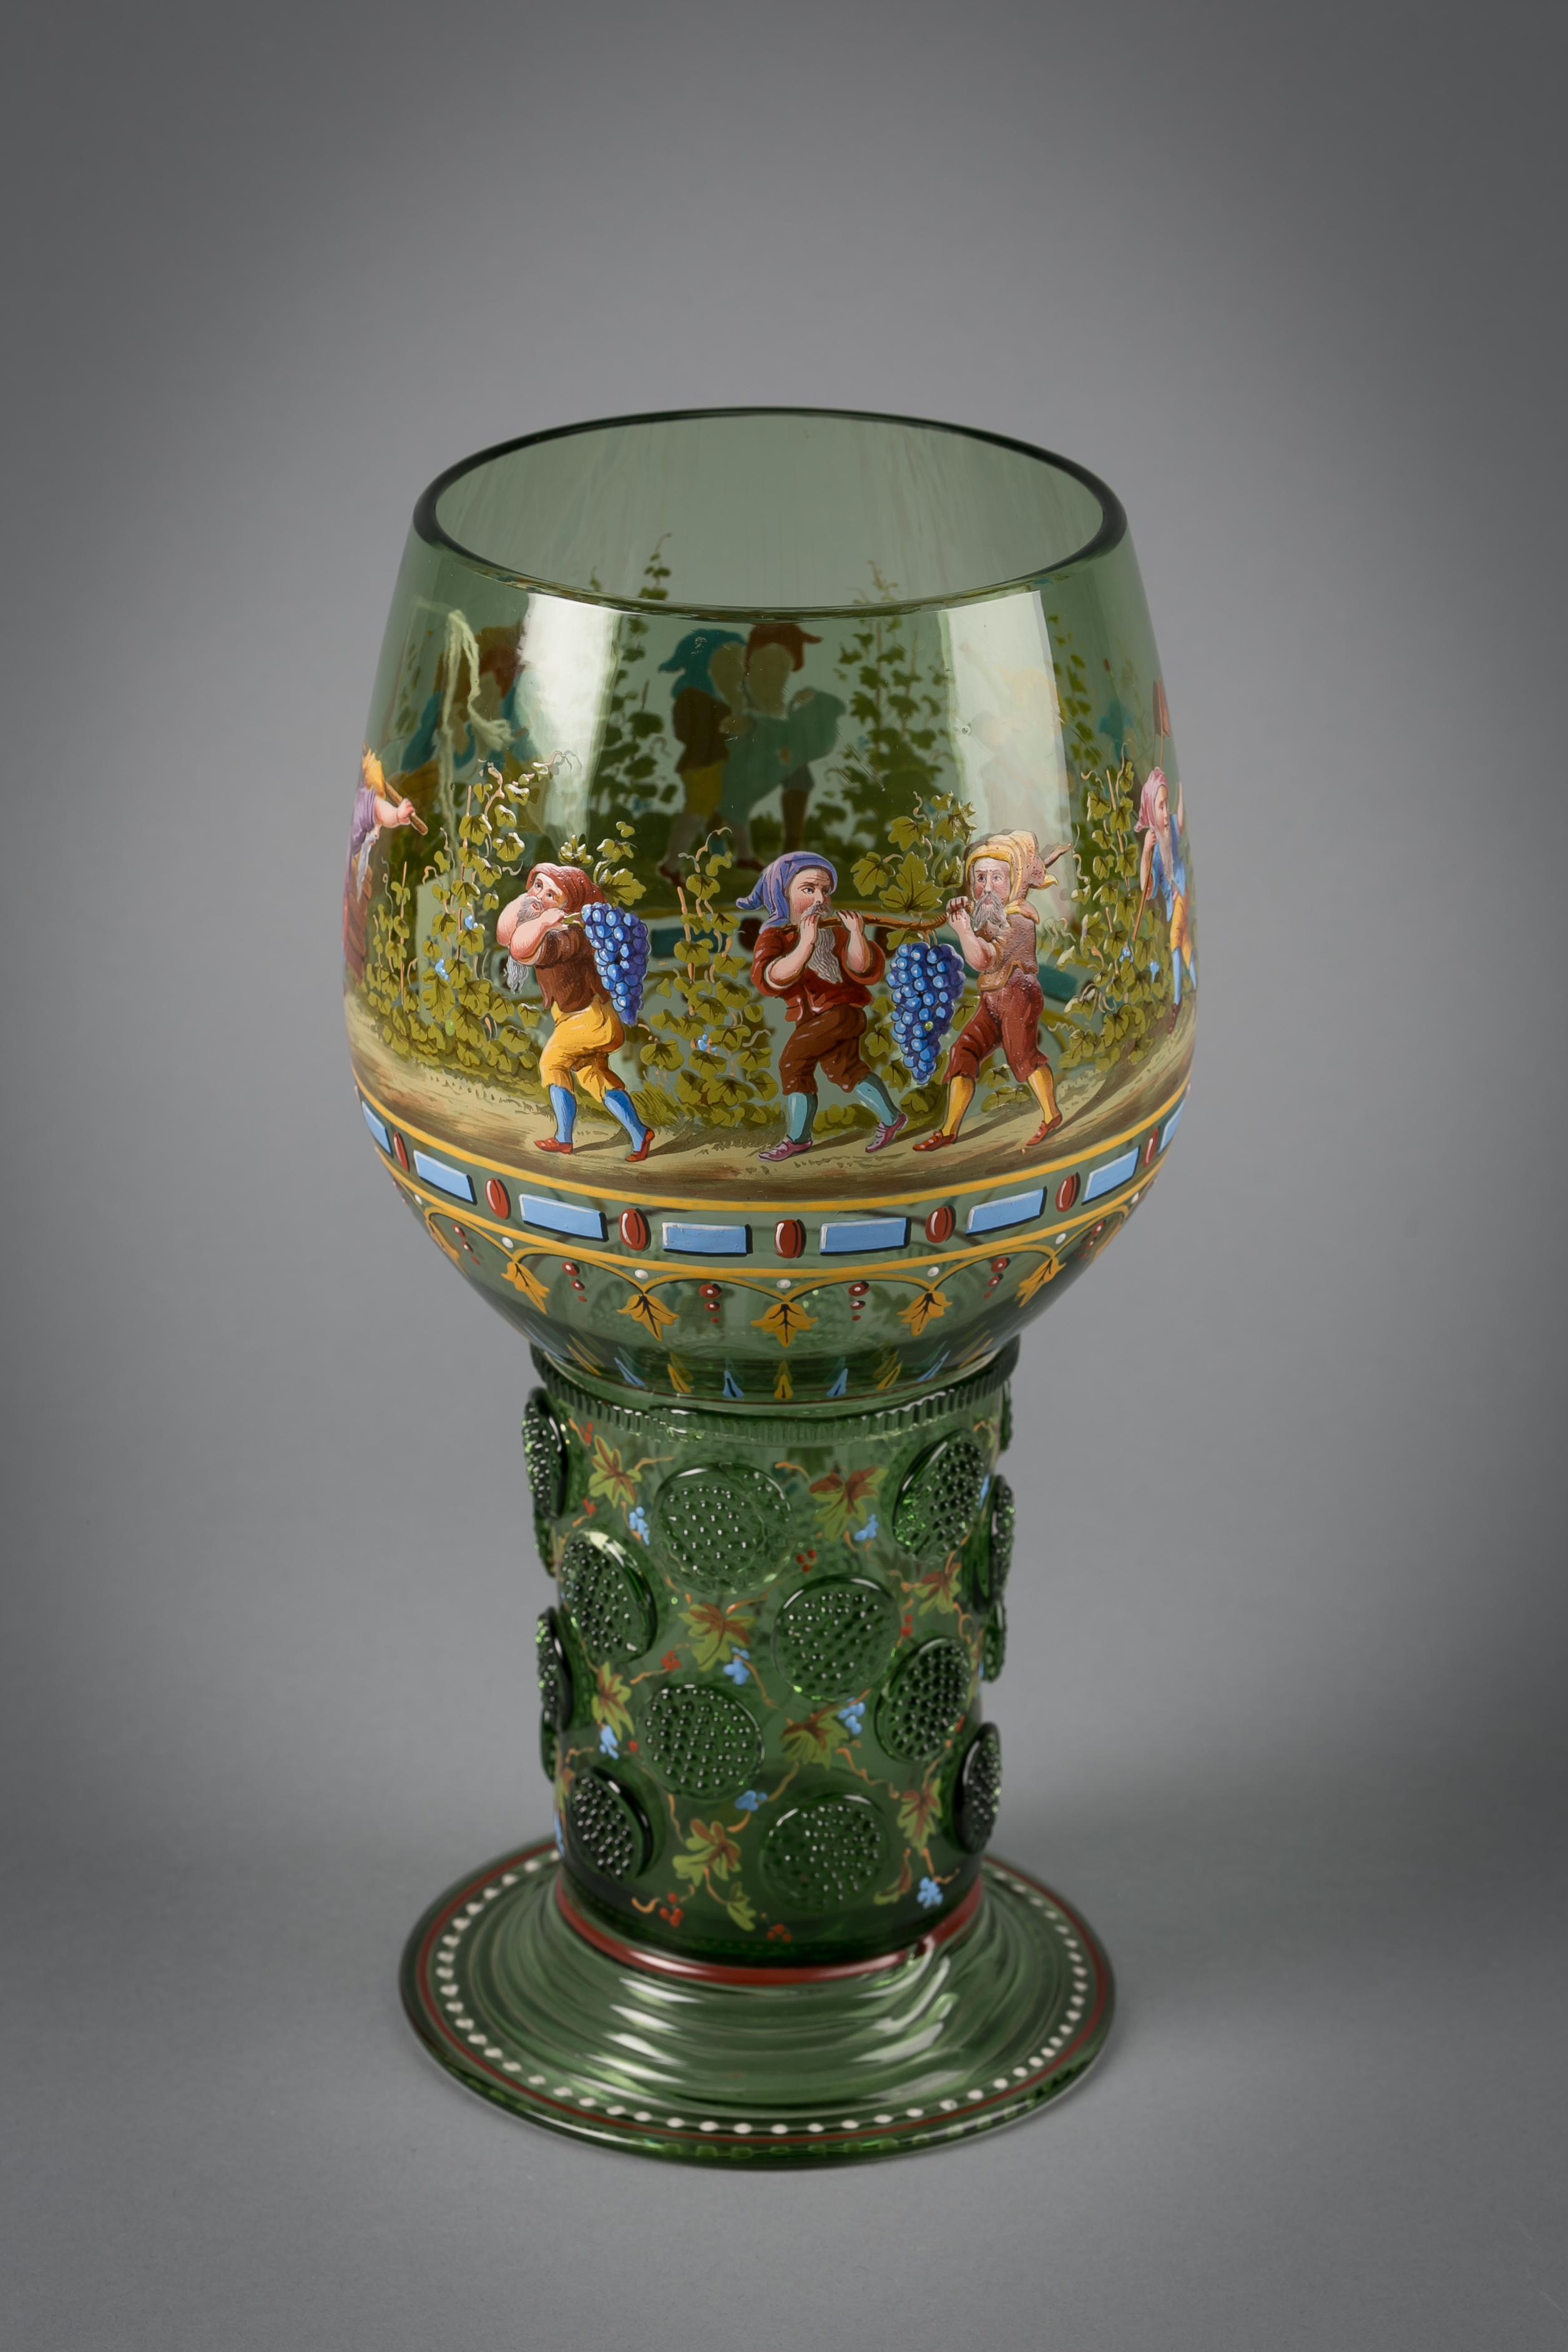 The Roemer glass is painted with dwarves harvesting. Marked with the JLL monogram in white enamel.